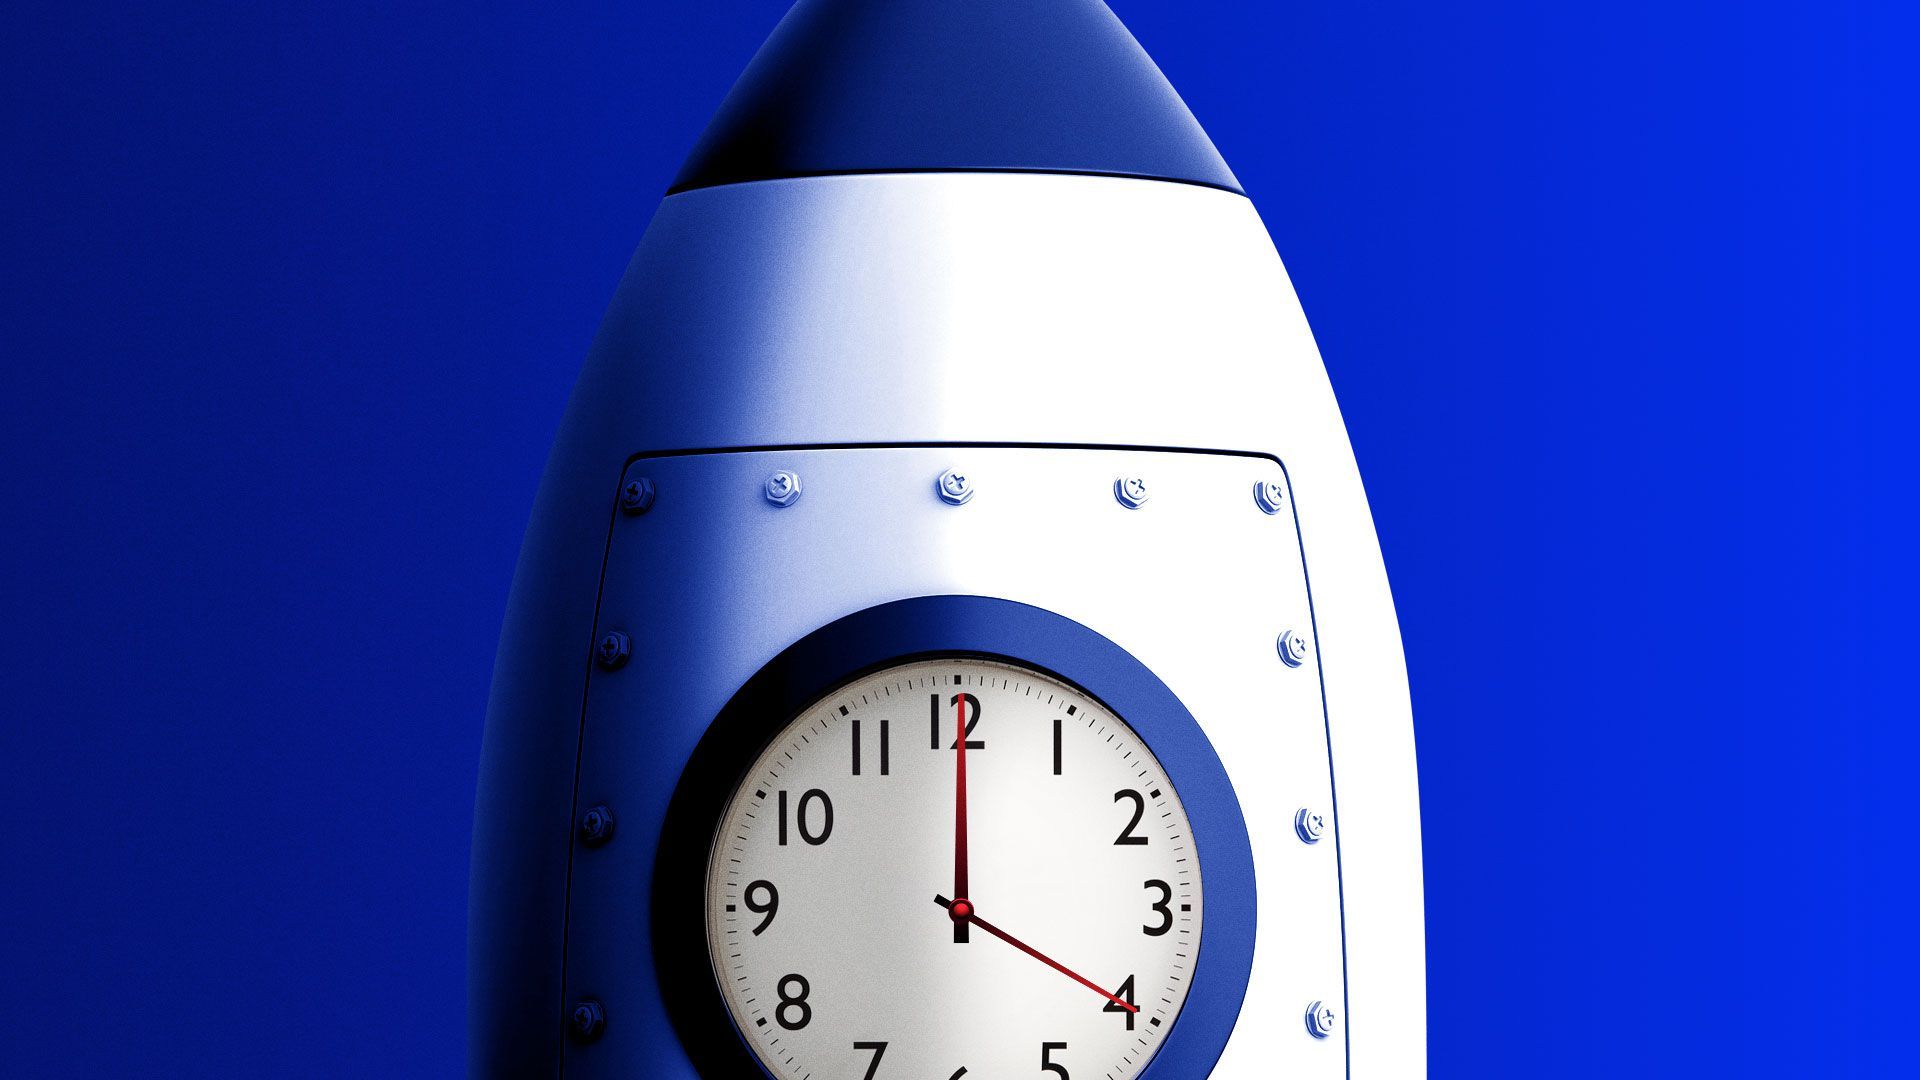 Illustration of rocket with a clock as its window face